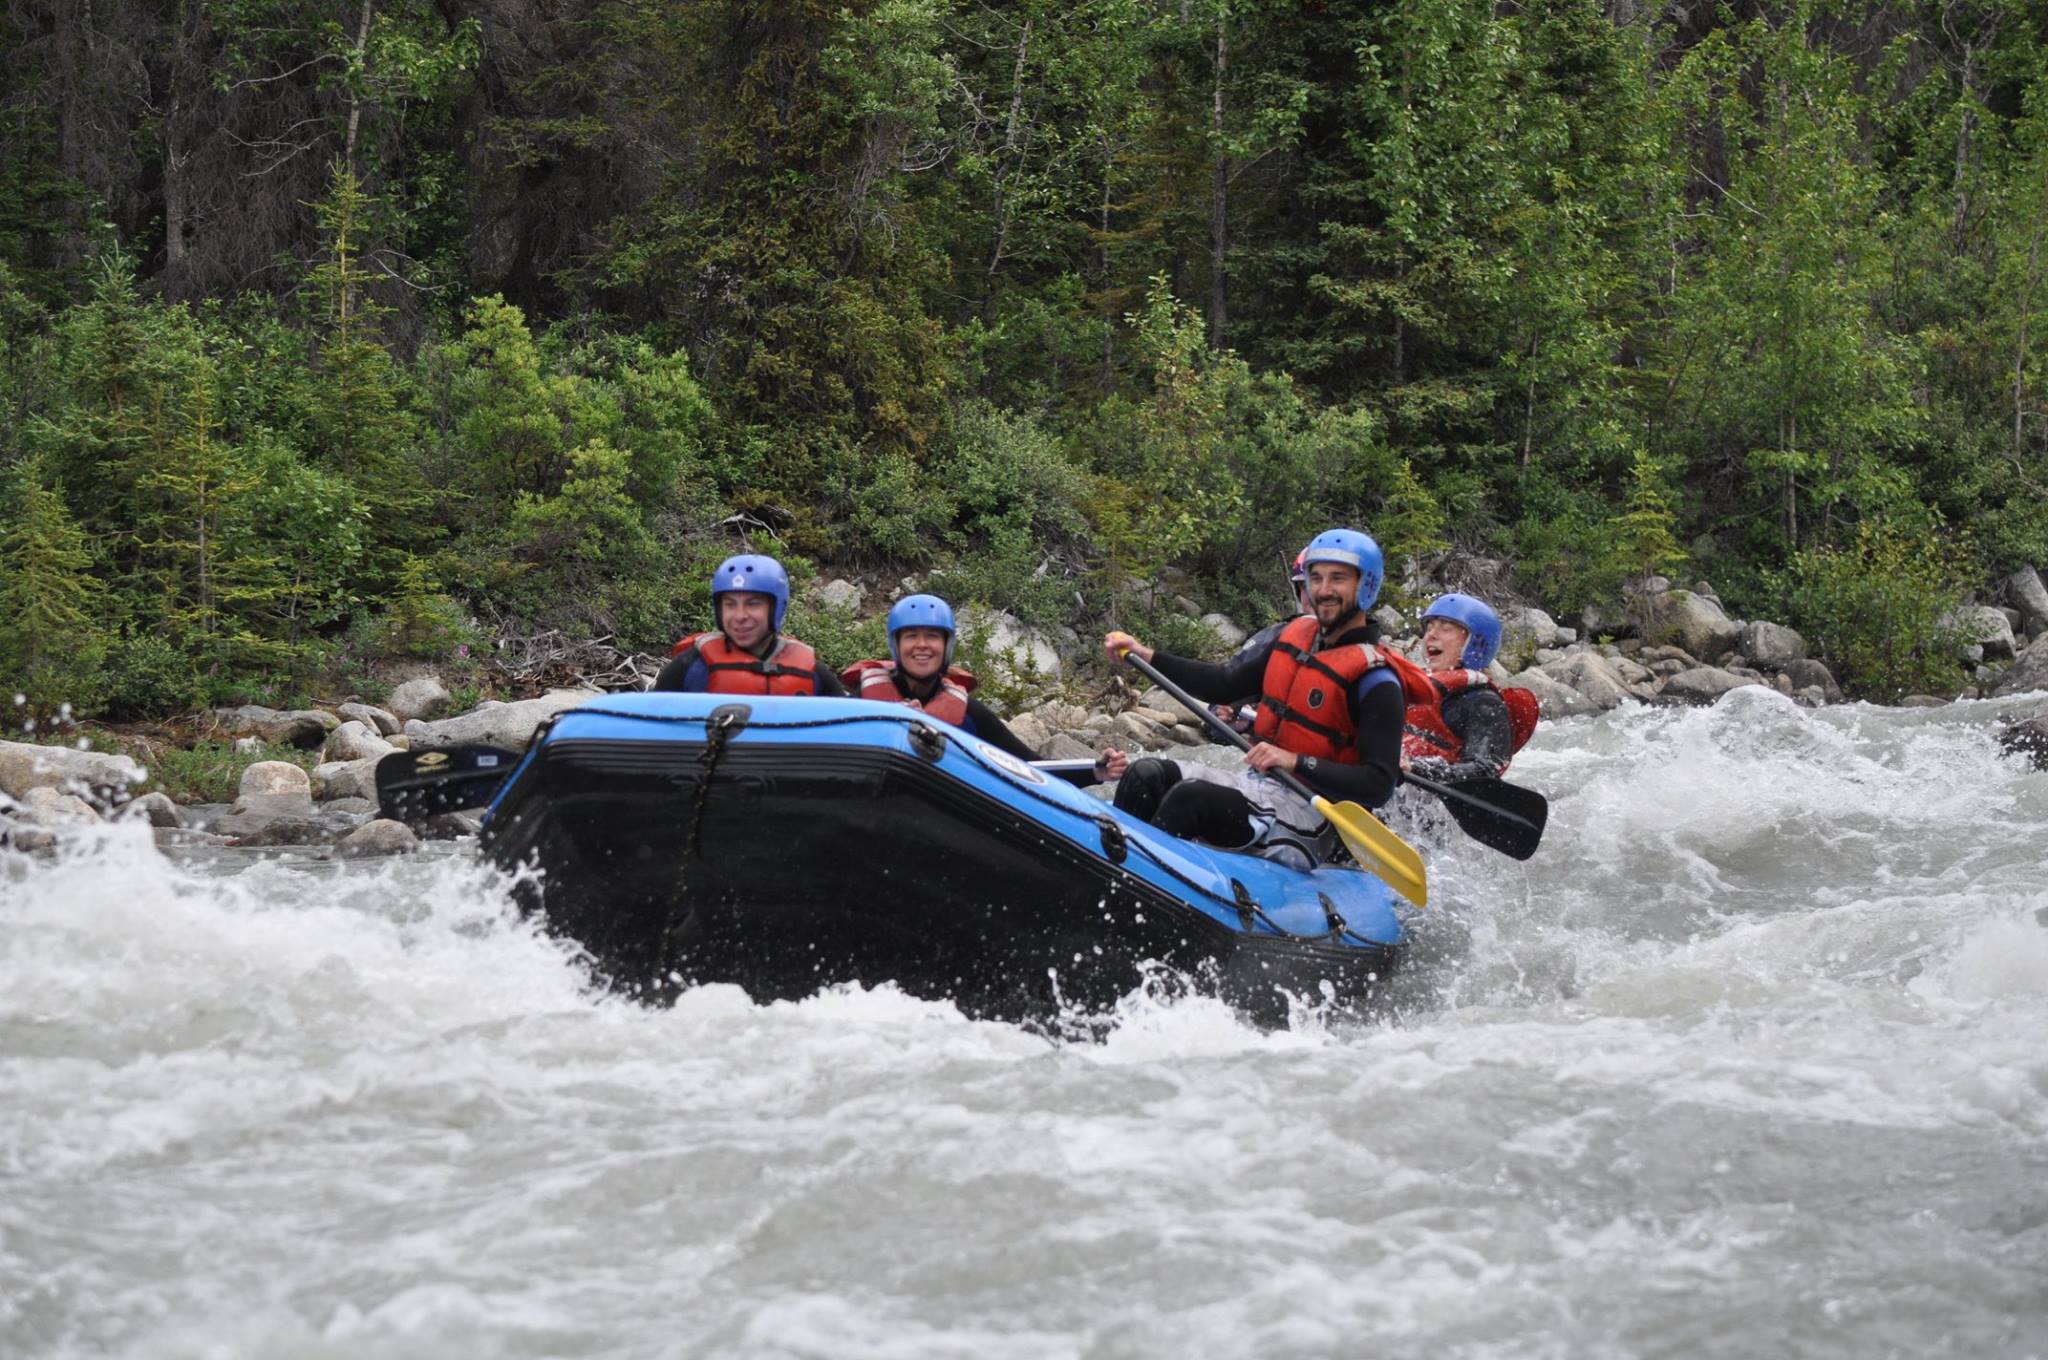 Exciting rapids await on the Blanchard River